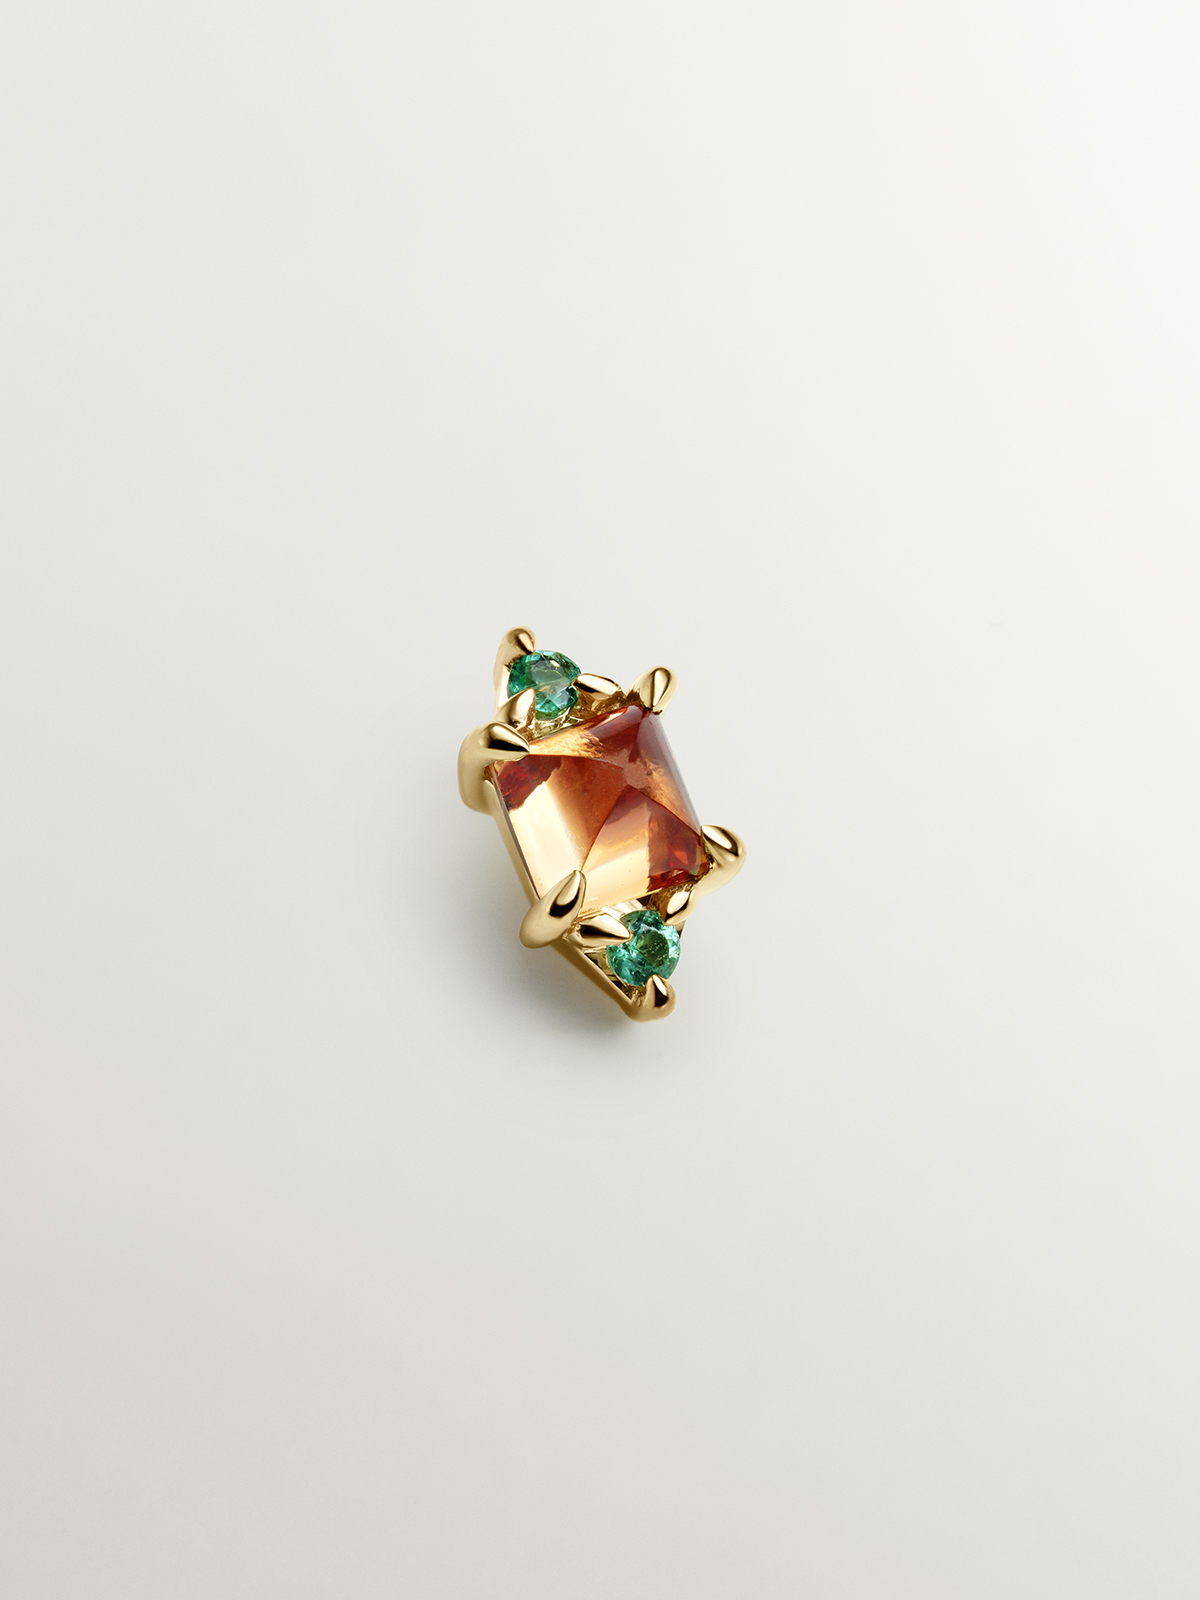 Individual 18k yellow gold pending with orange sapphire and green emeralds